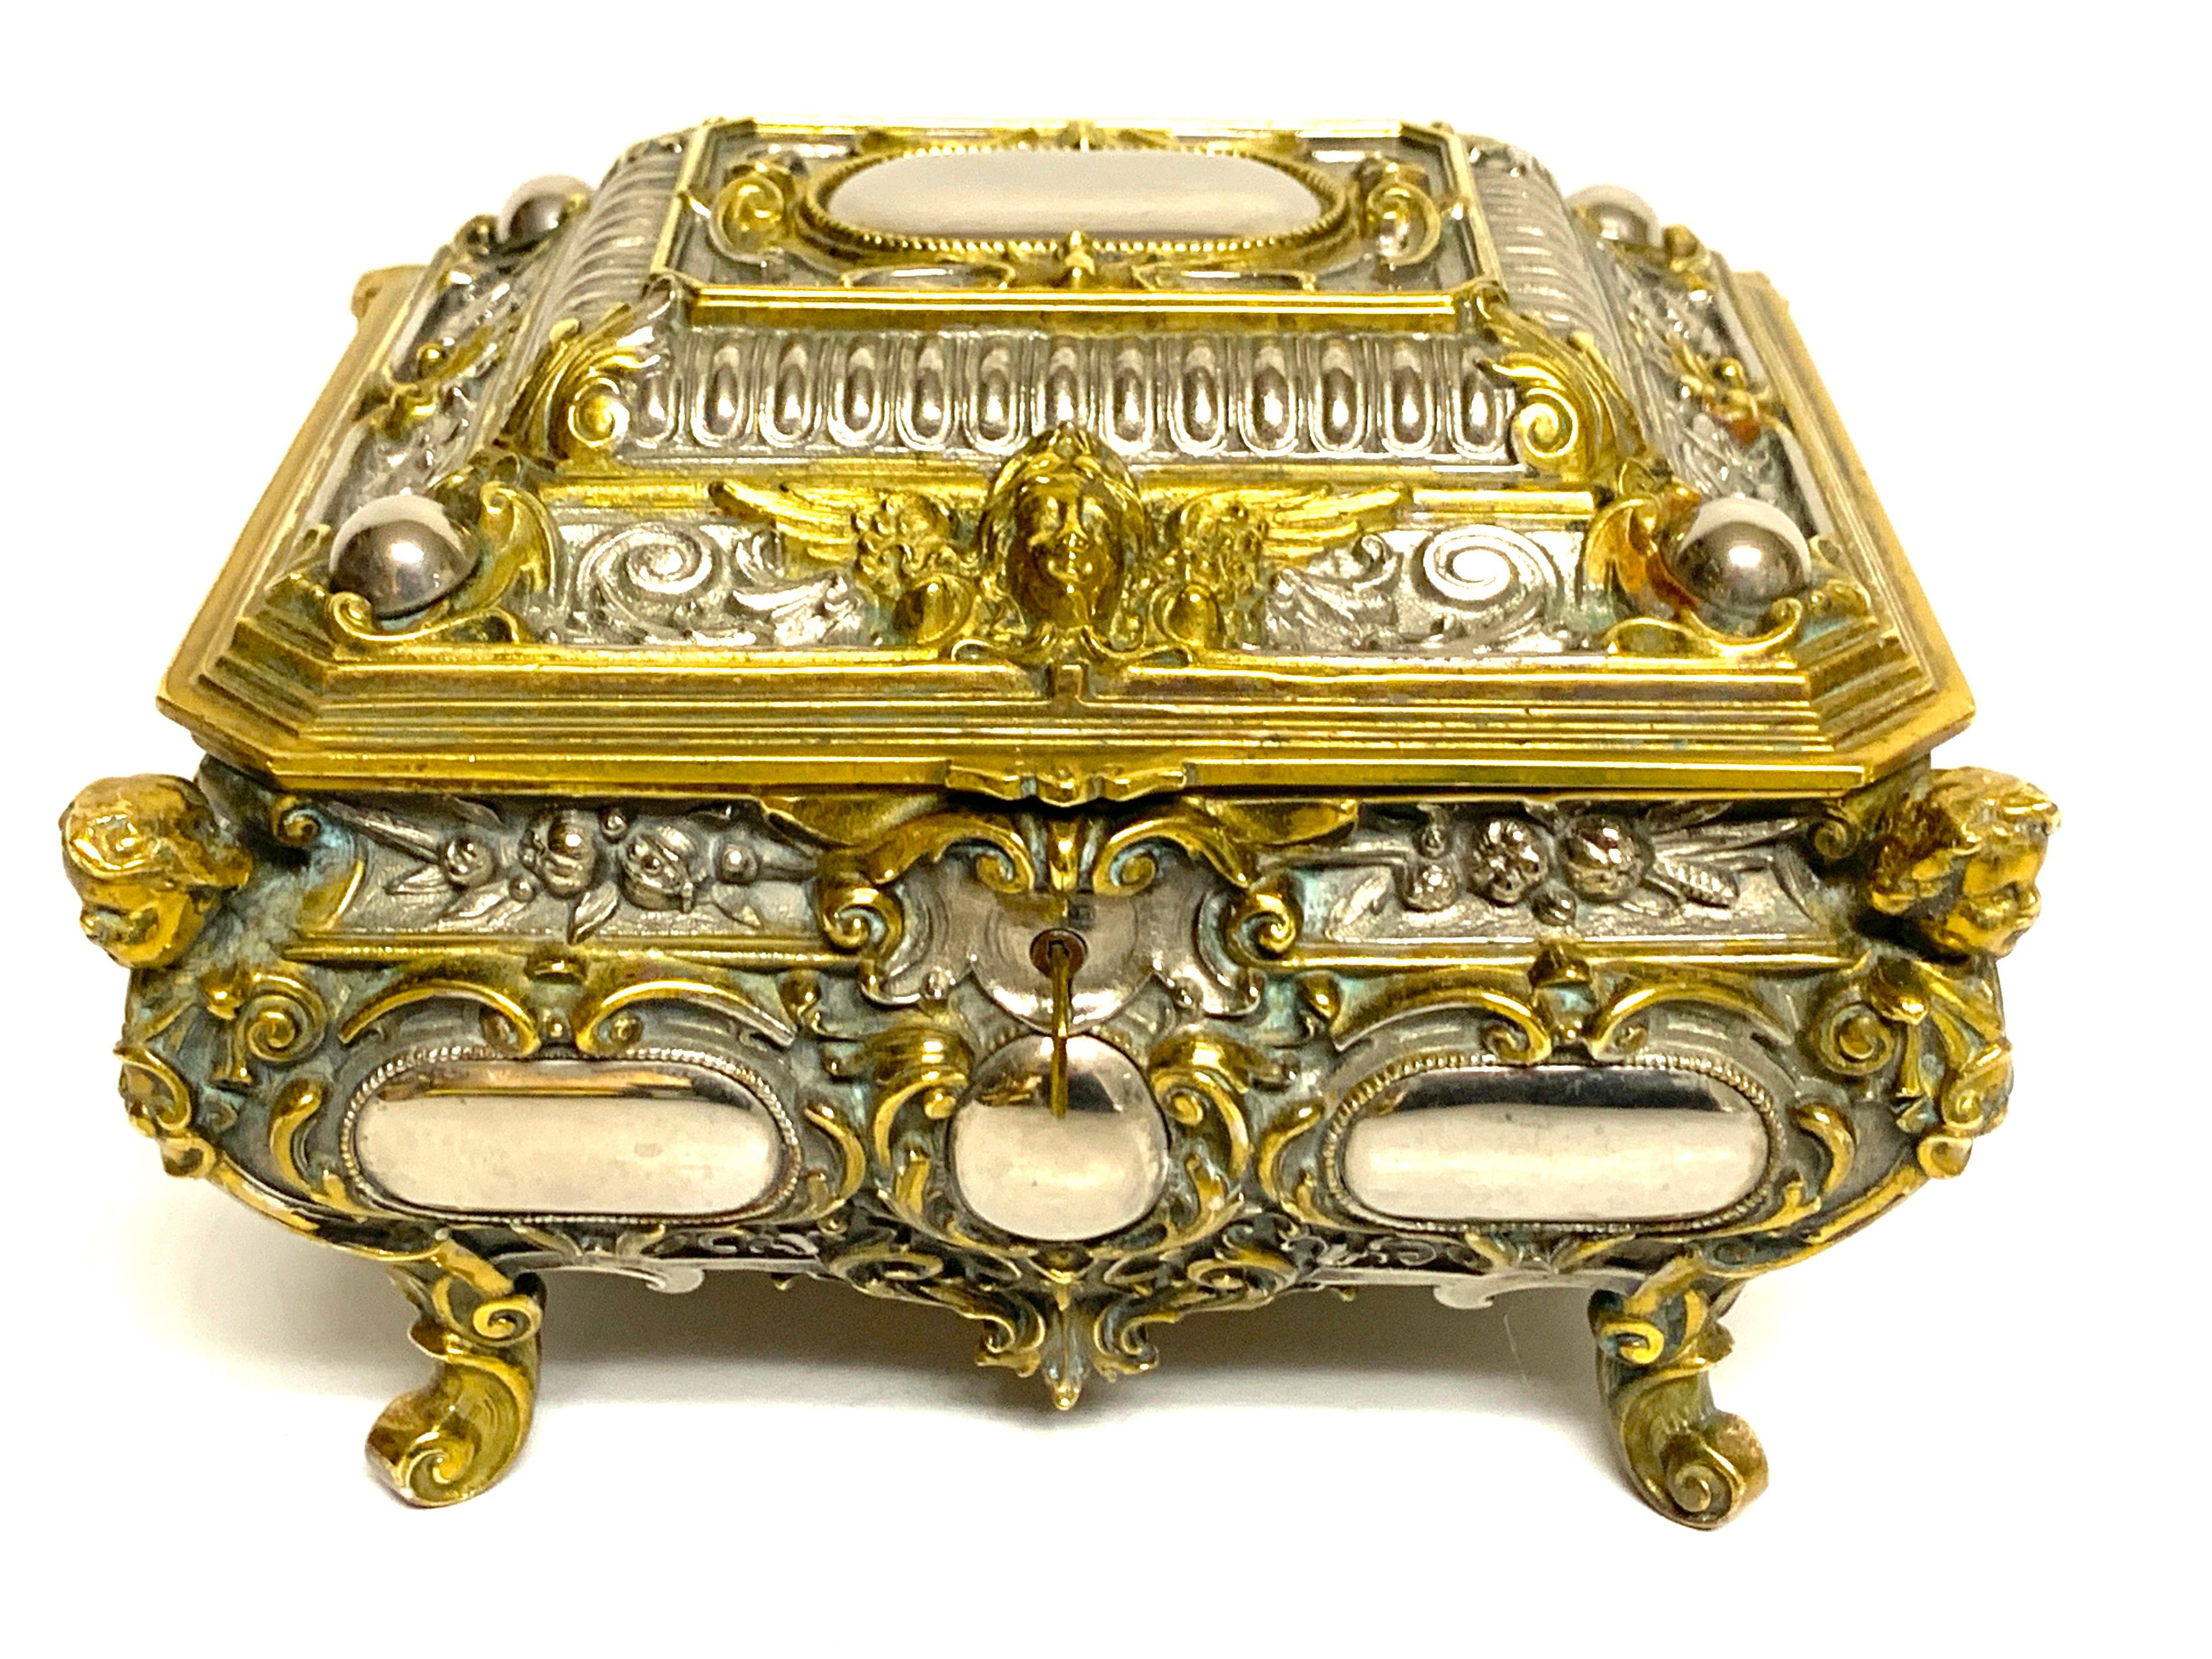 Magnificent silvered bronze and ormolu jewelry/table box, a substantial heavy weight box with Intricate detail with the silvered bronze resembling mirrors, with ormolu mounts. Complete with a very secure lock with two working keys. The interior